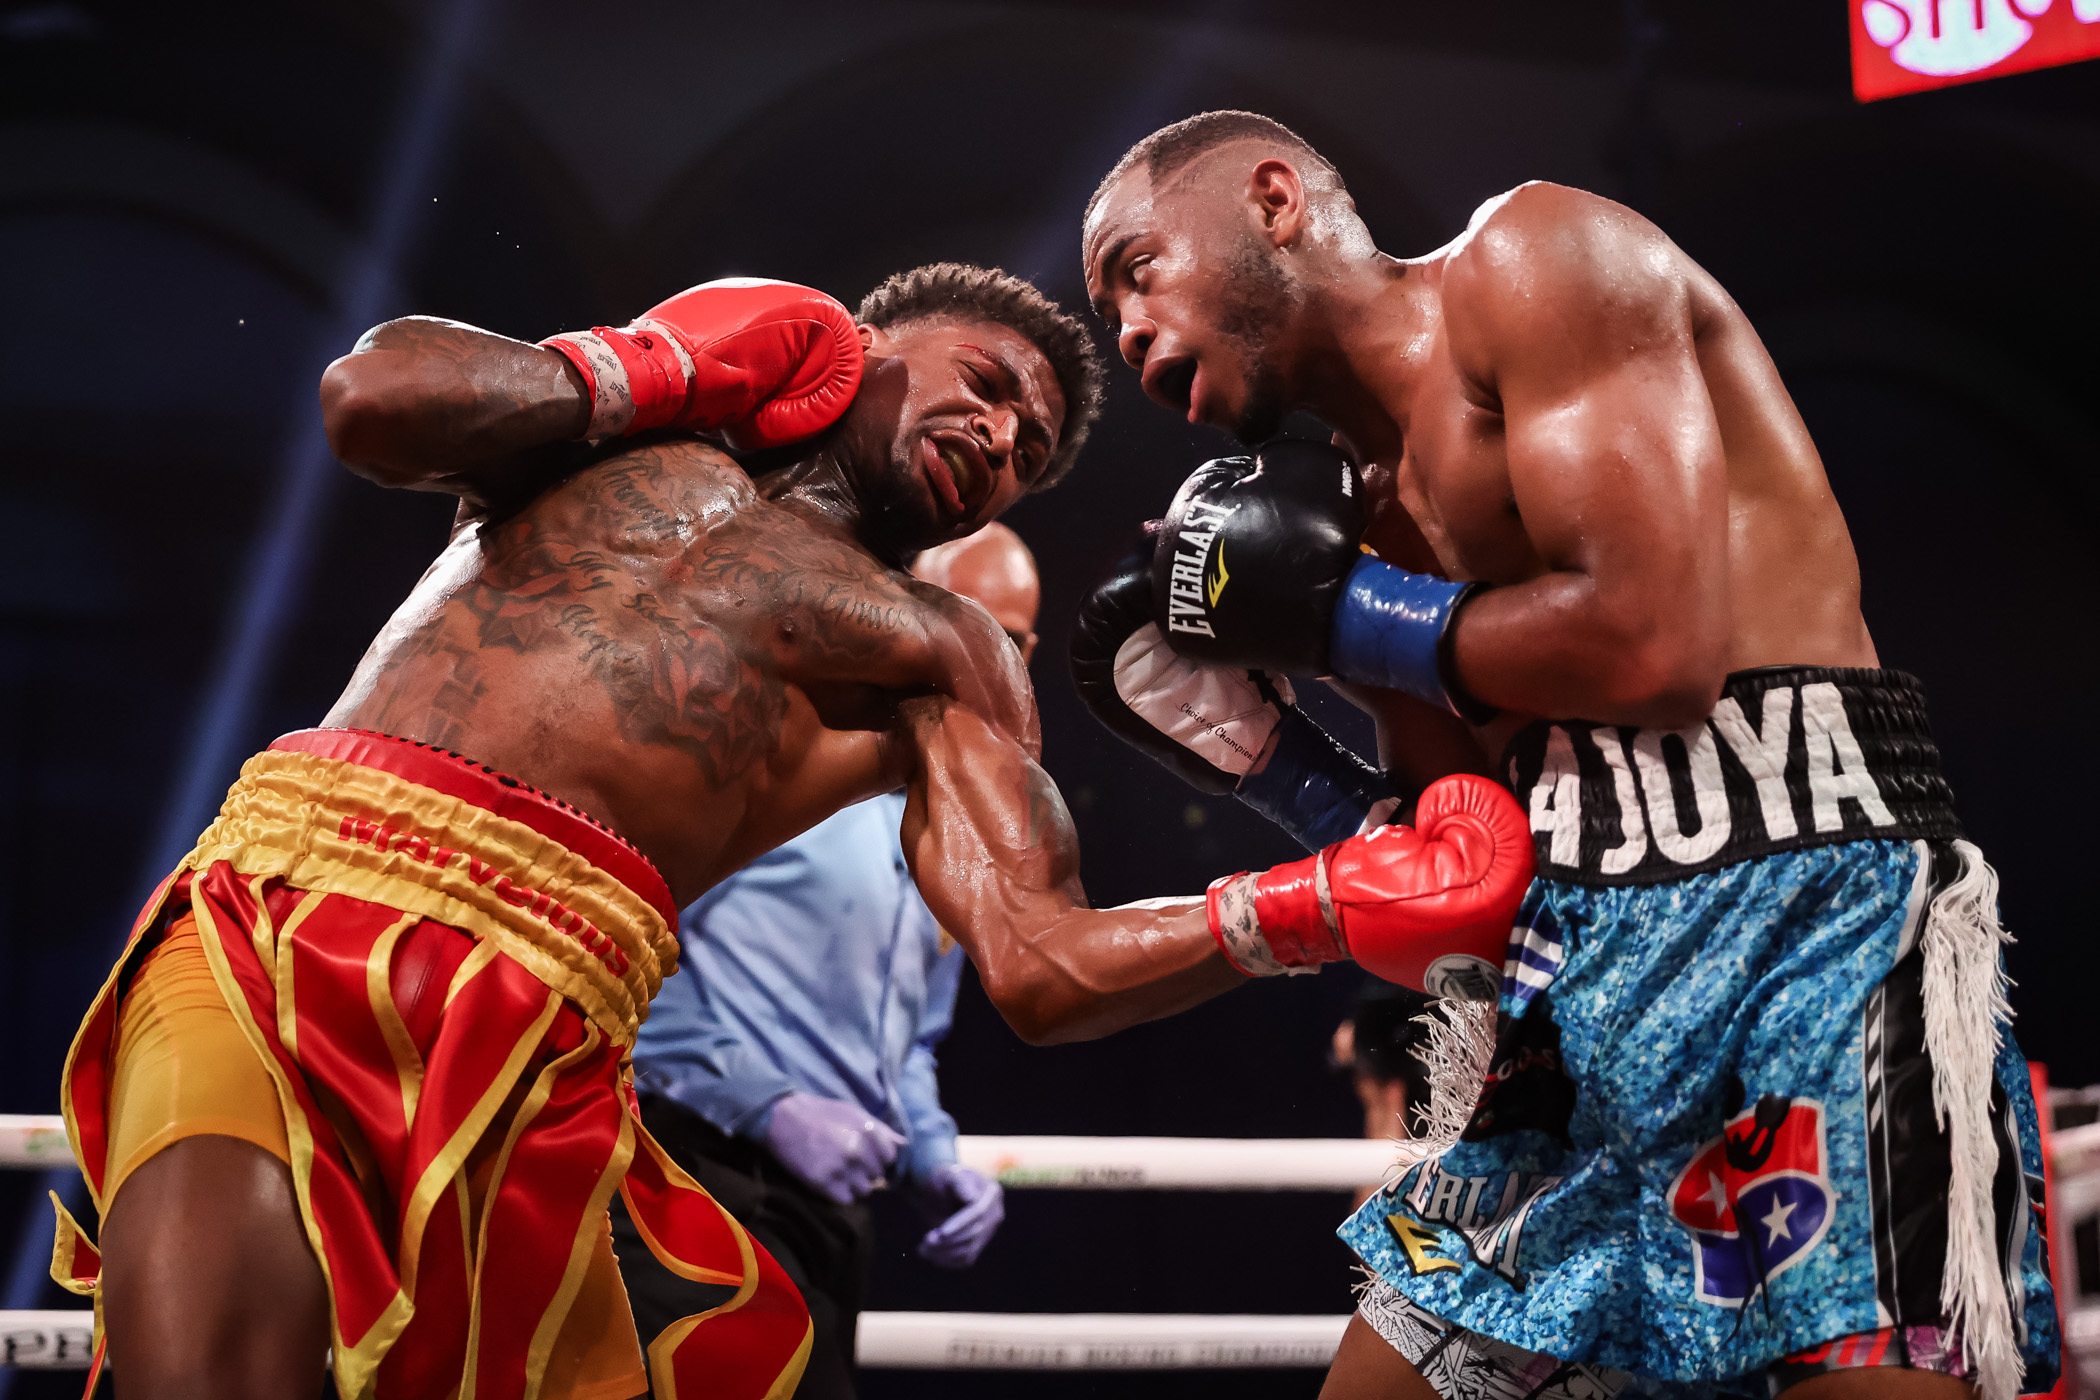 Marquis Taylor pulls off the upset in beating Yoelvis Gomez on the Ennis-Villa Undercard